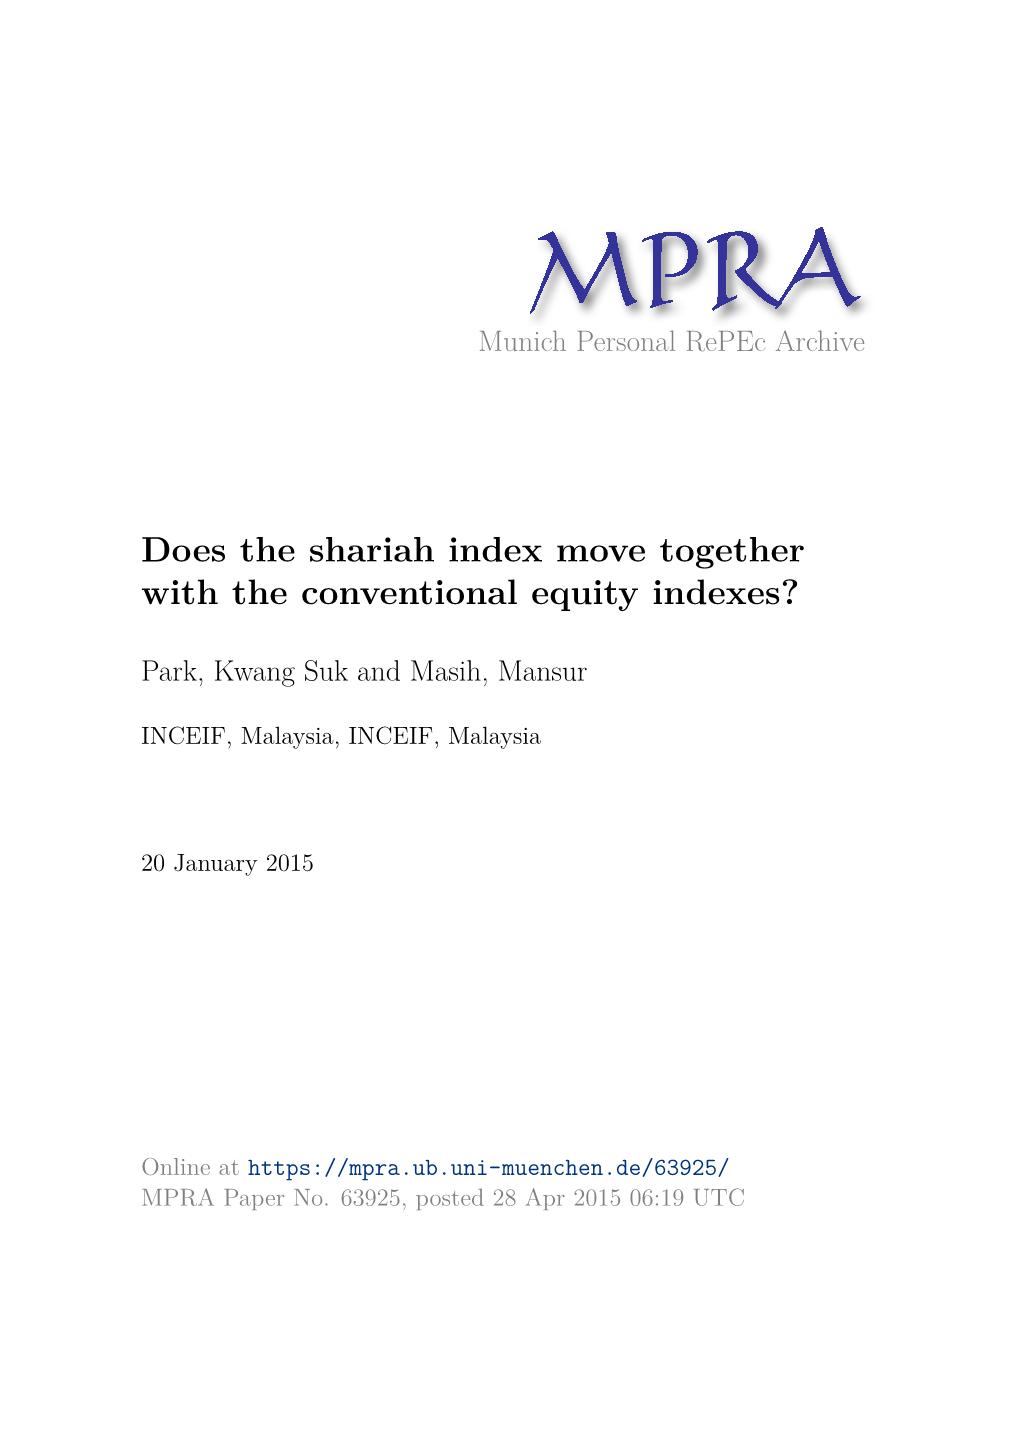 Does the Shariah Index Move Together with the Conventional Equity Indexes?